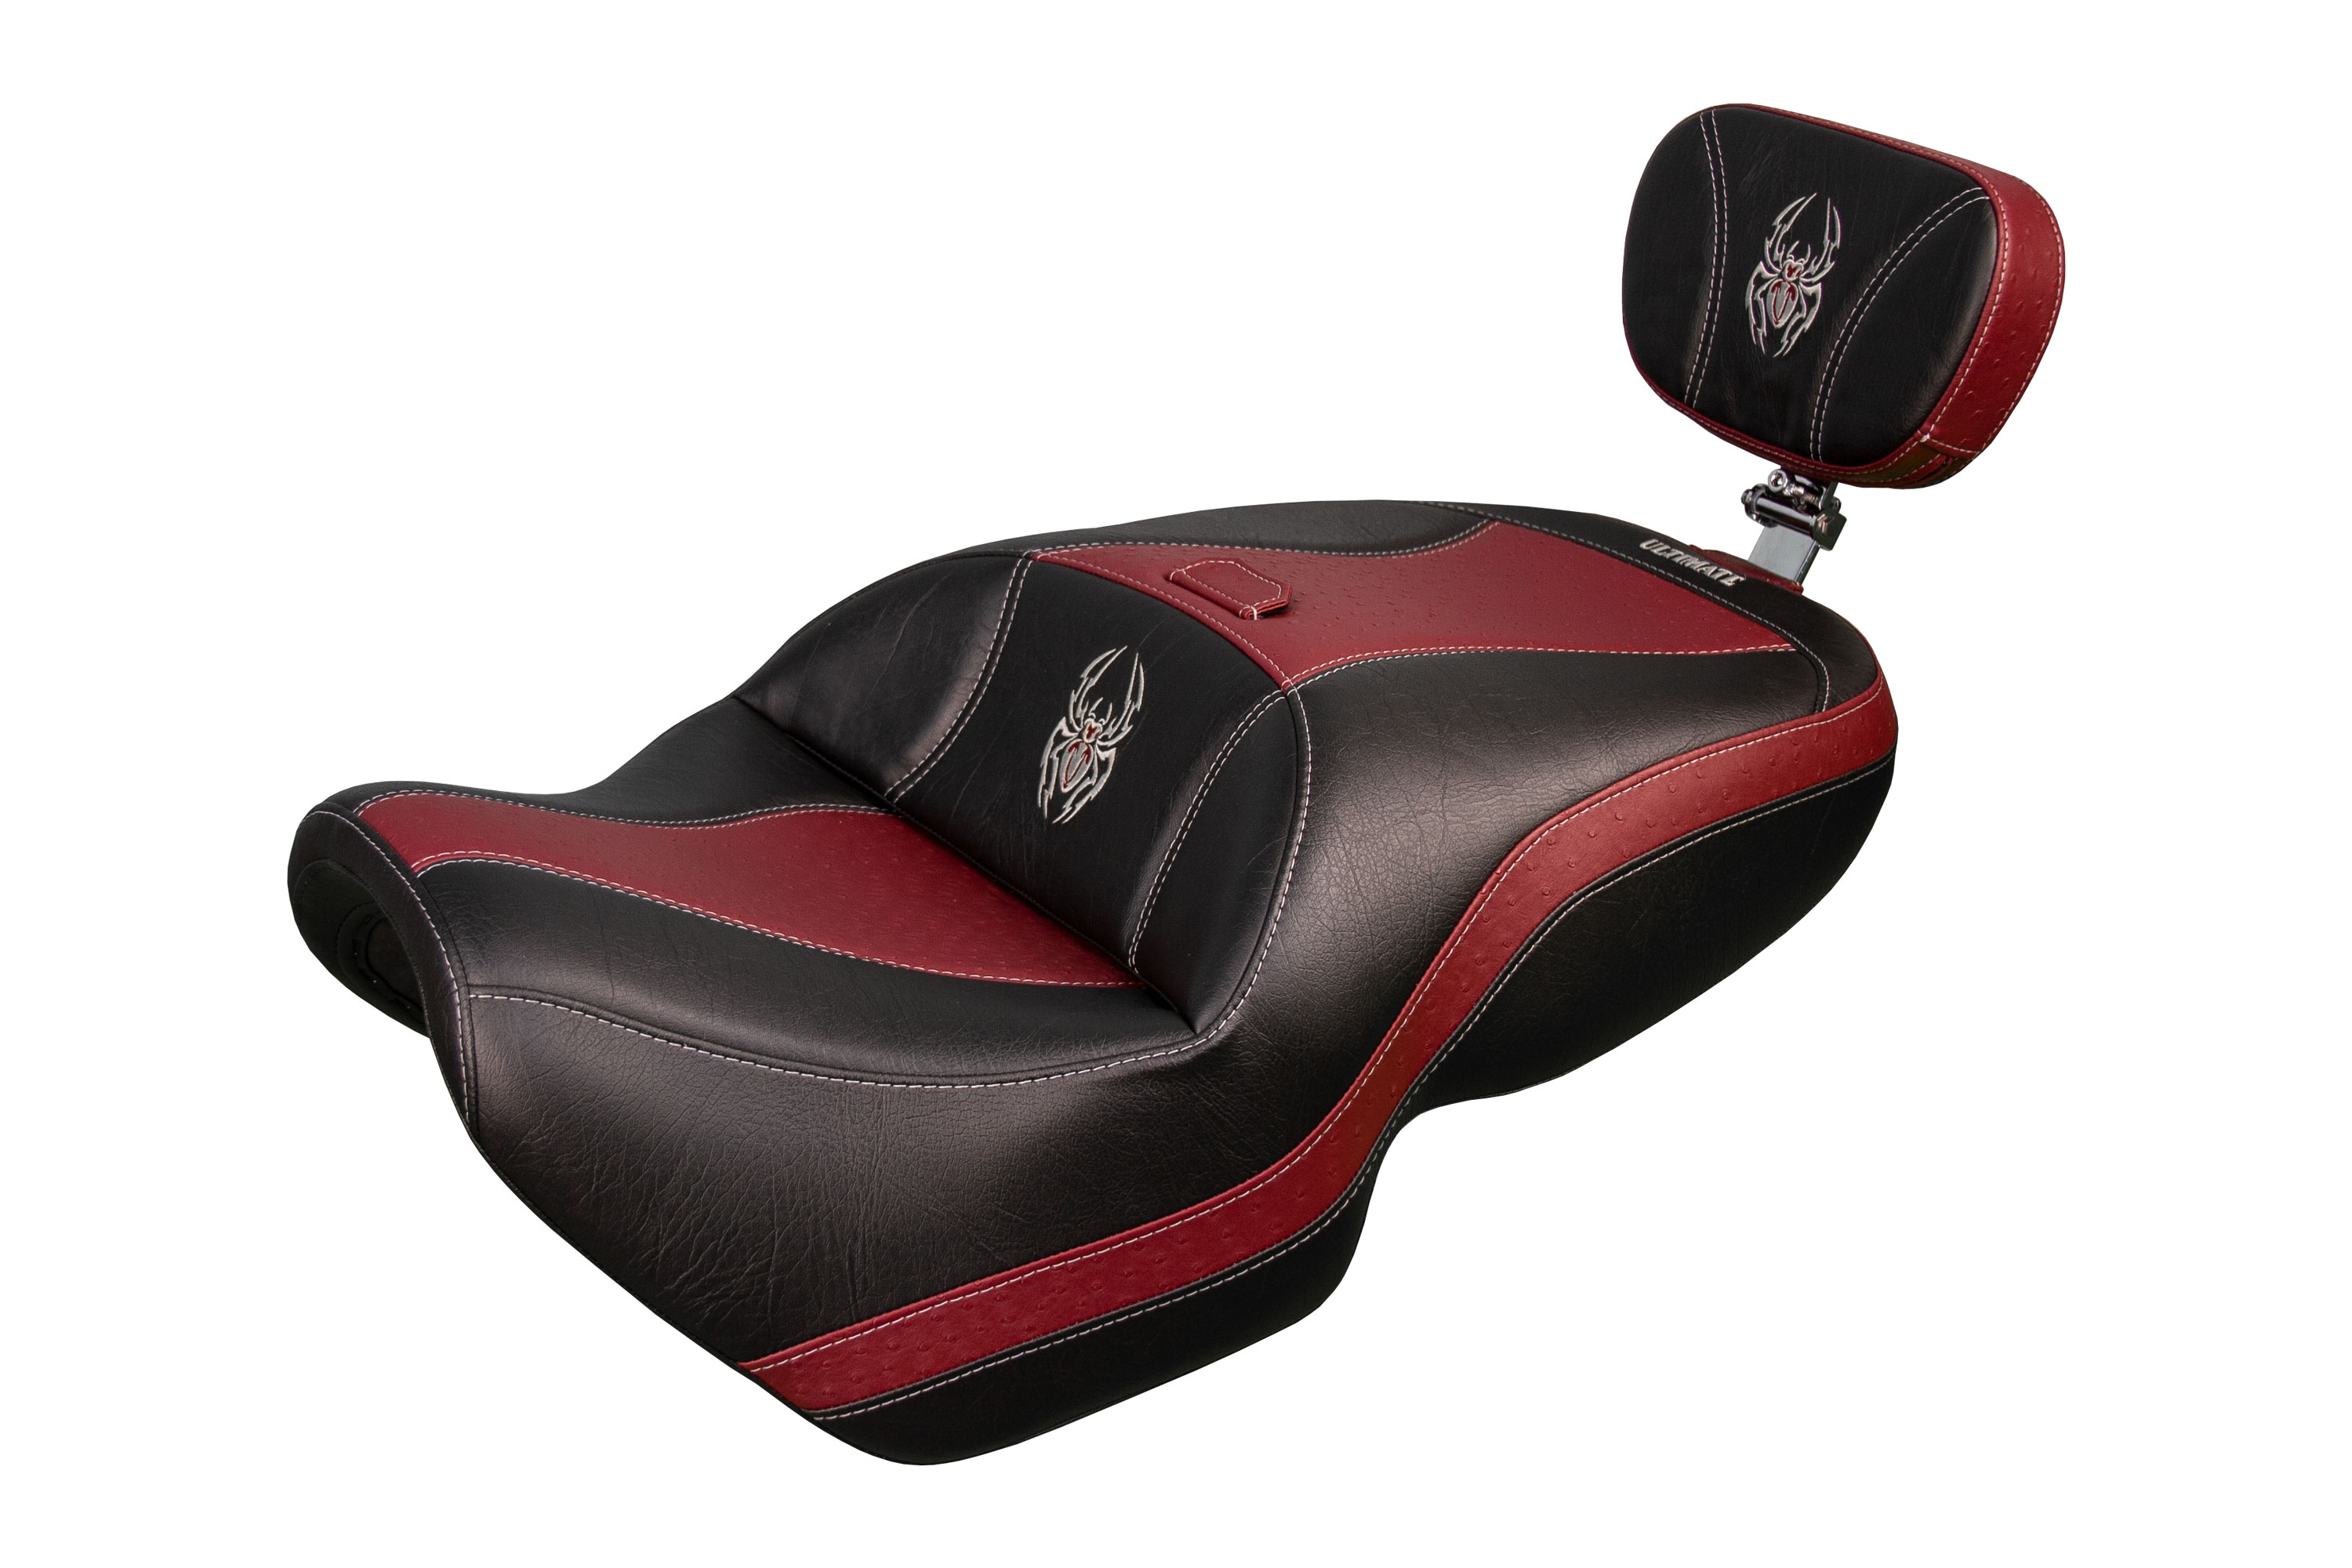 Spyder F3 Seat - Dark Red Ostrich Inlays and Logos (2020 and Newer)